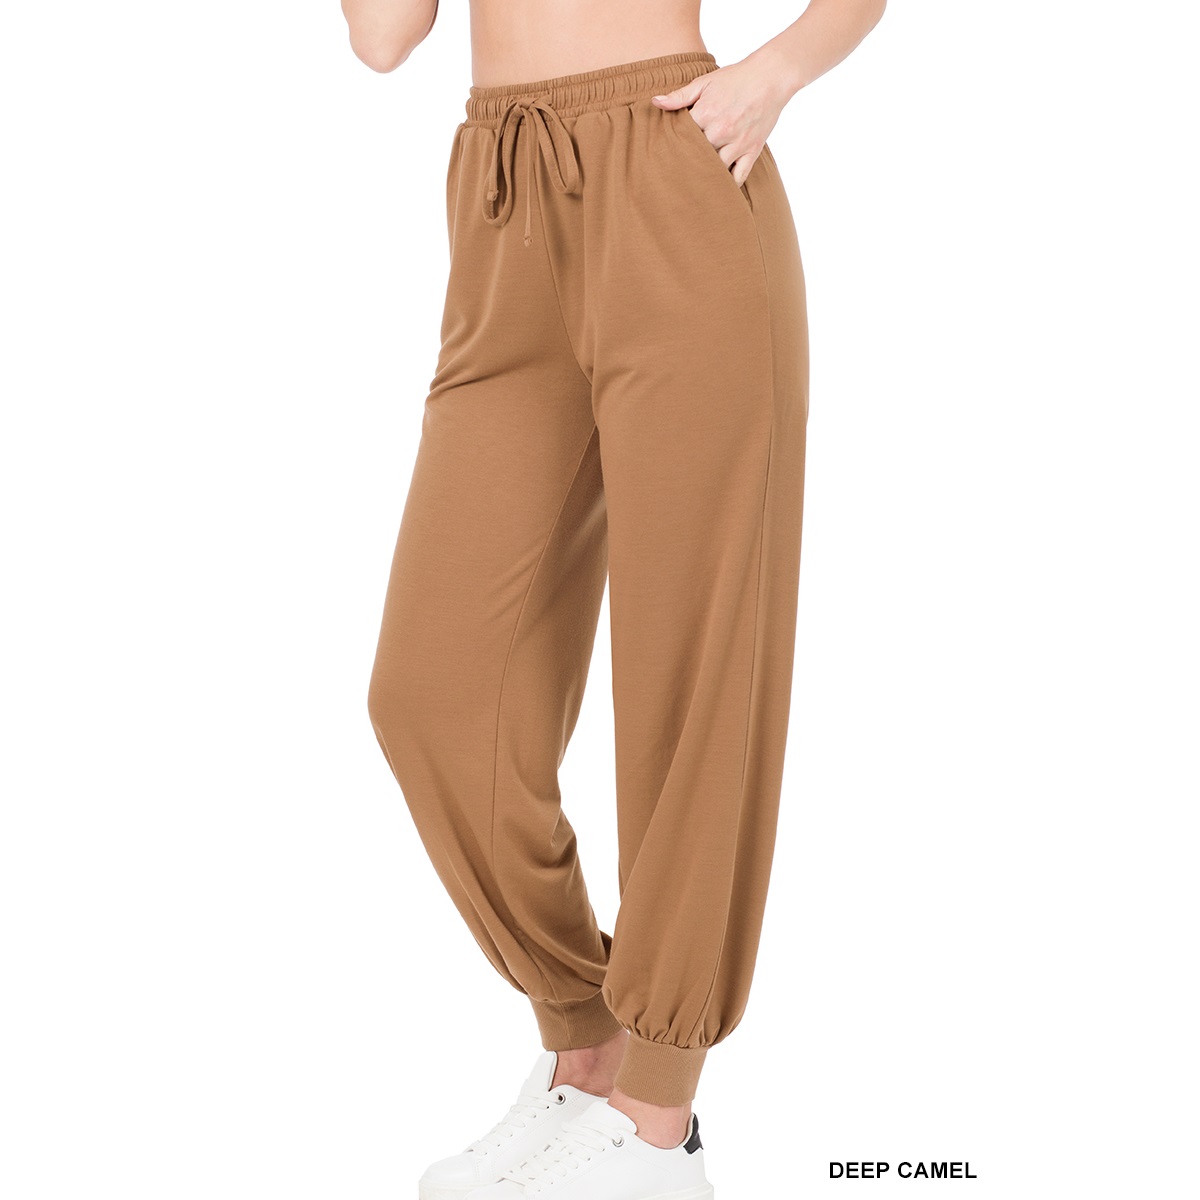 Soft French Terry Joggers - Relaxed Fit Side pockets, elastic waist, draw cord and cuffed legs